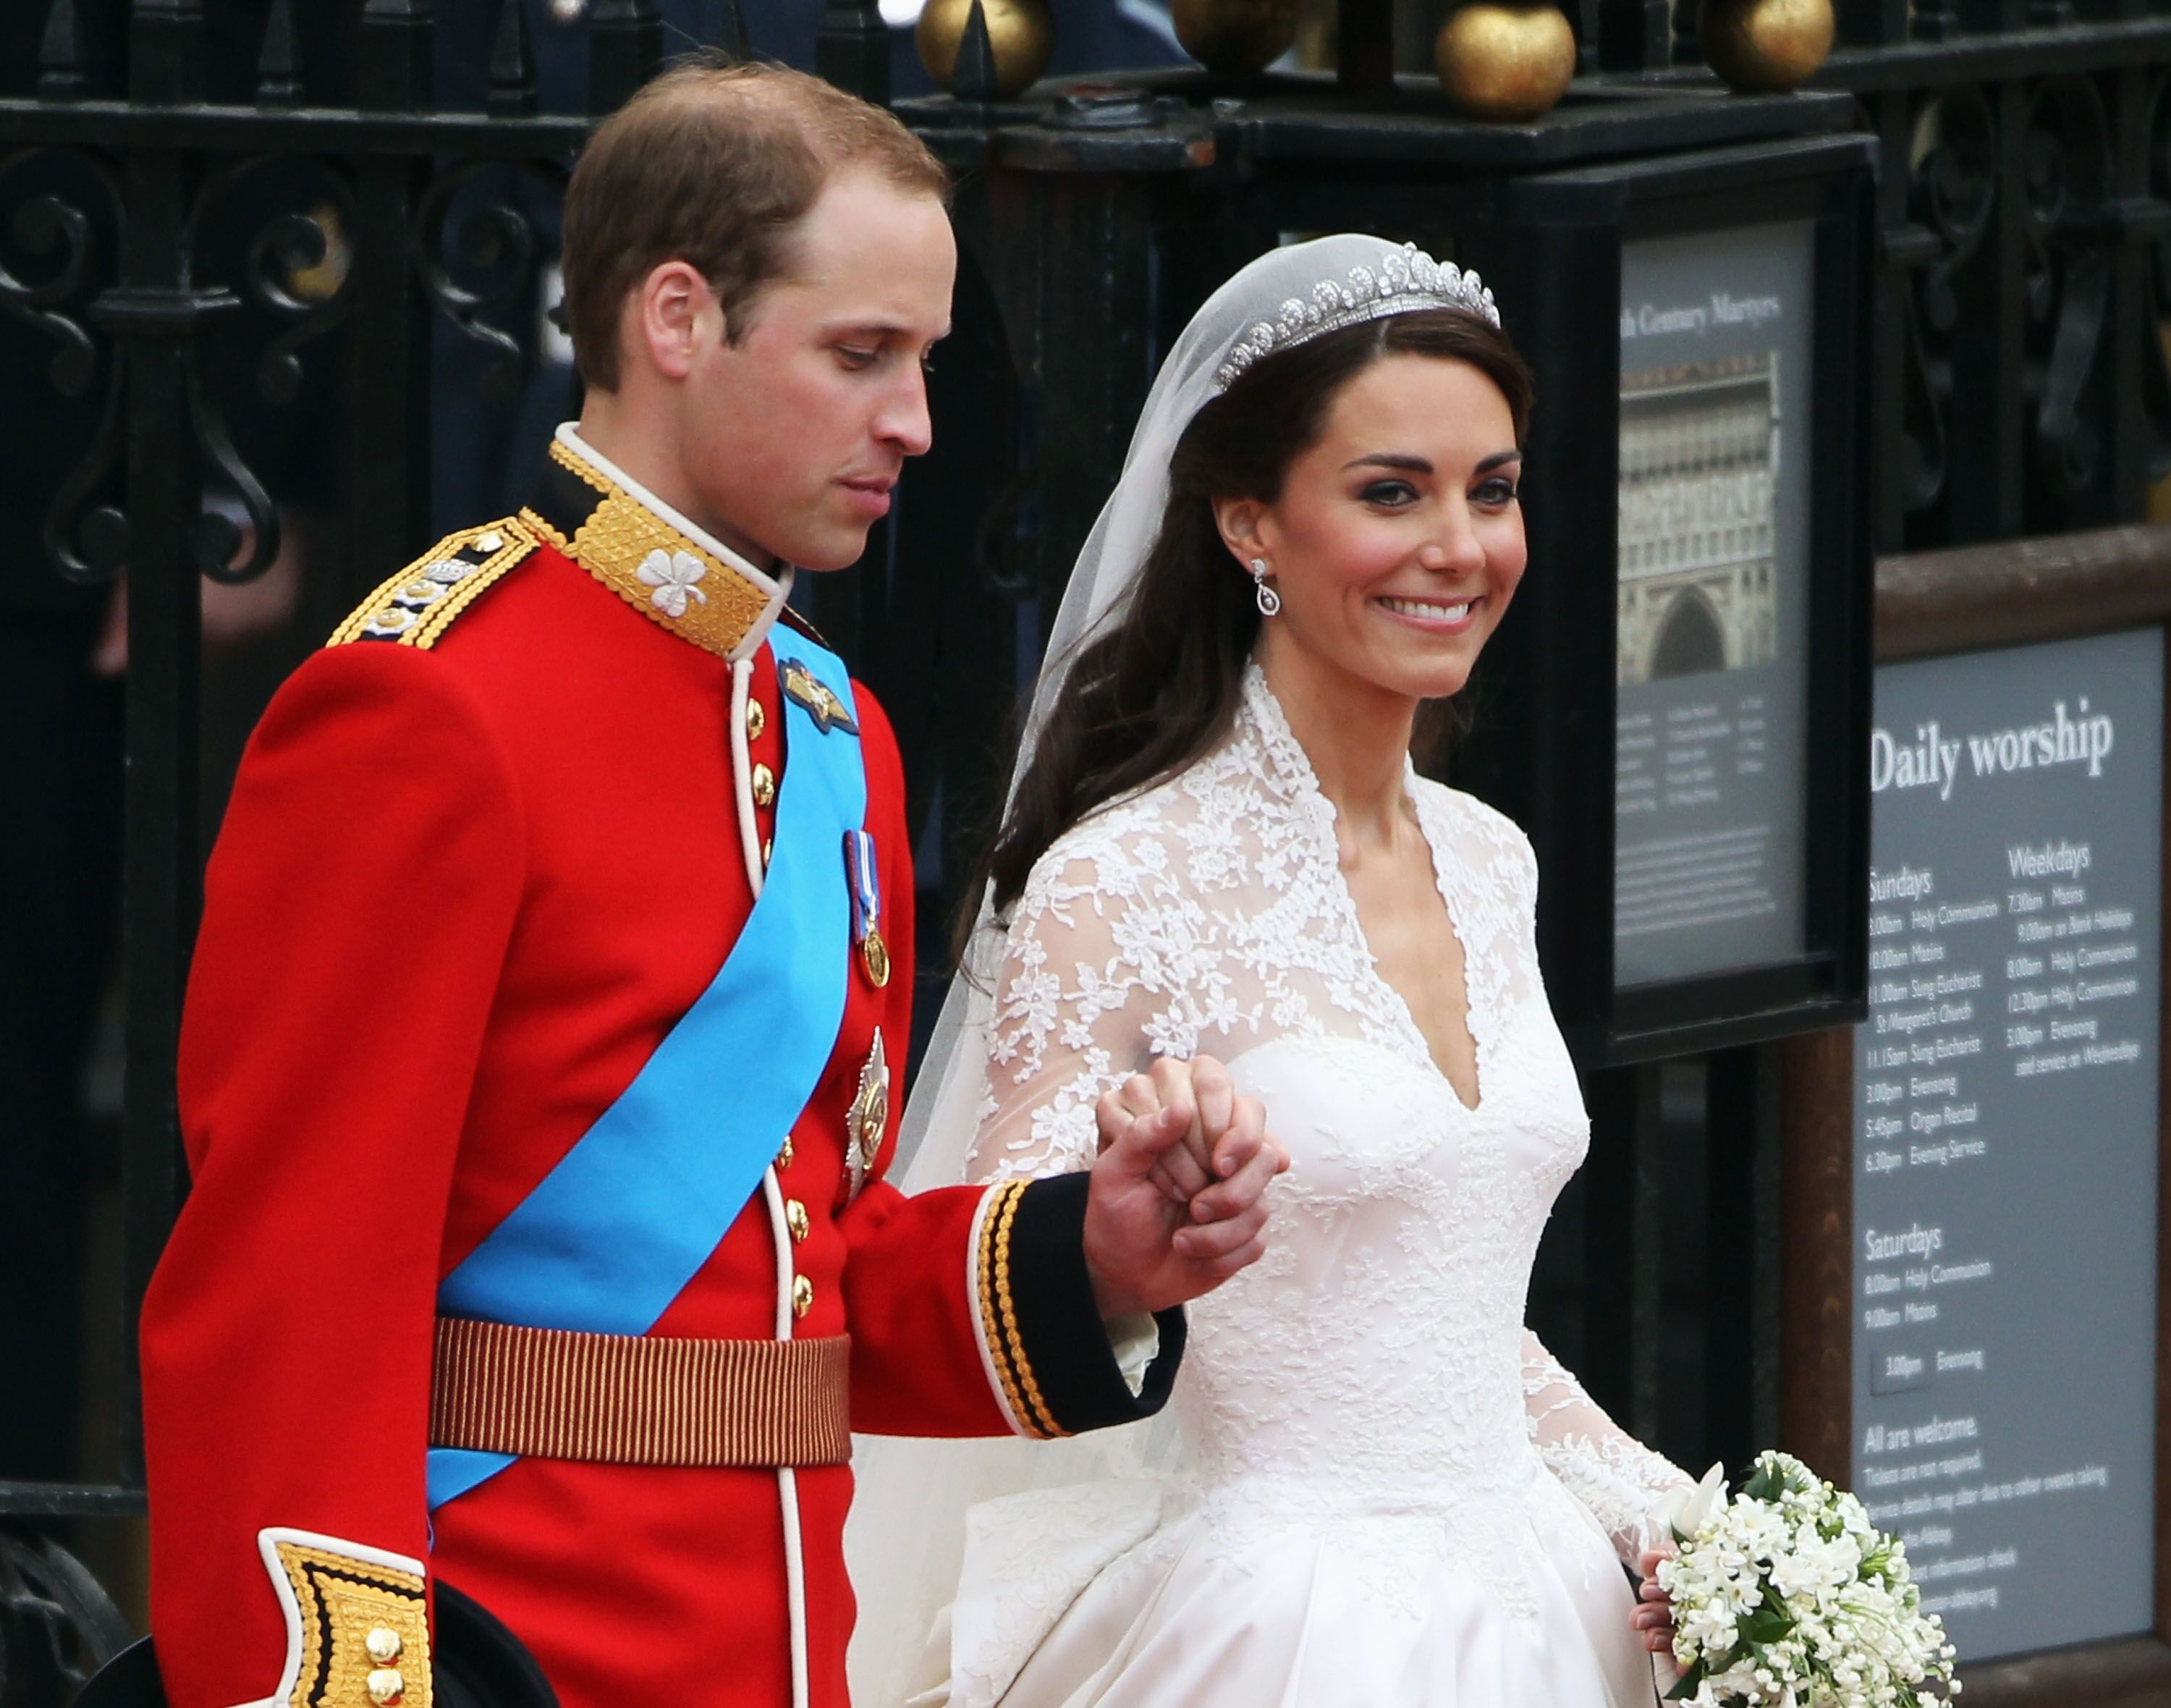 Prince William and Kate Middleton on their wedding day. | Source: Getty Images